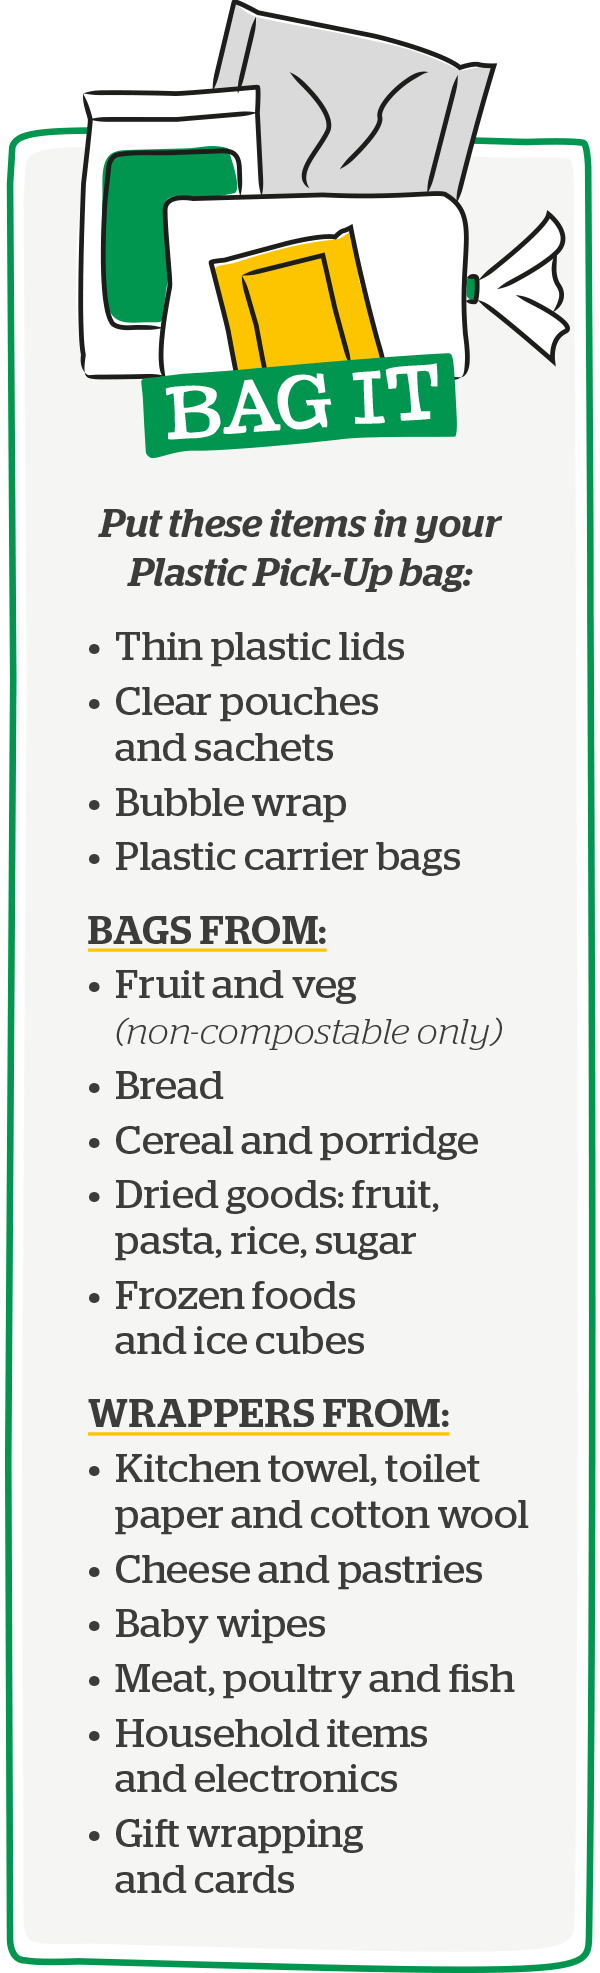 Put these items in your Plastic Pick-Up bag: Thin plastic lids, clear pouches and sachets, bubble wrap, plastic carrier bags. Bags from: Fruit and veg (non-compostable only), bread, cereal and porridge, dried goods (fruit pasta, rice, sugar), frozen foods and ice cubes. Wrappers from: Kitchen towel, toilet paper and cotton wool, cheese and pastries, baby wipes, meat,  poutlry and fish, household items and electronics, gift wrapping and cards.